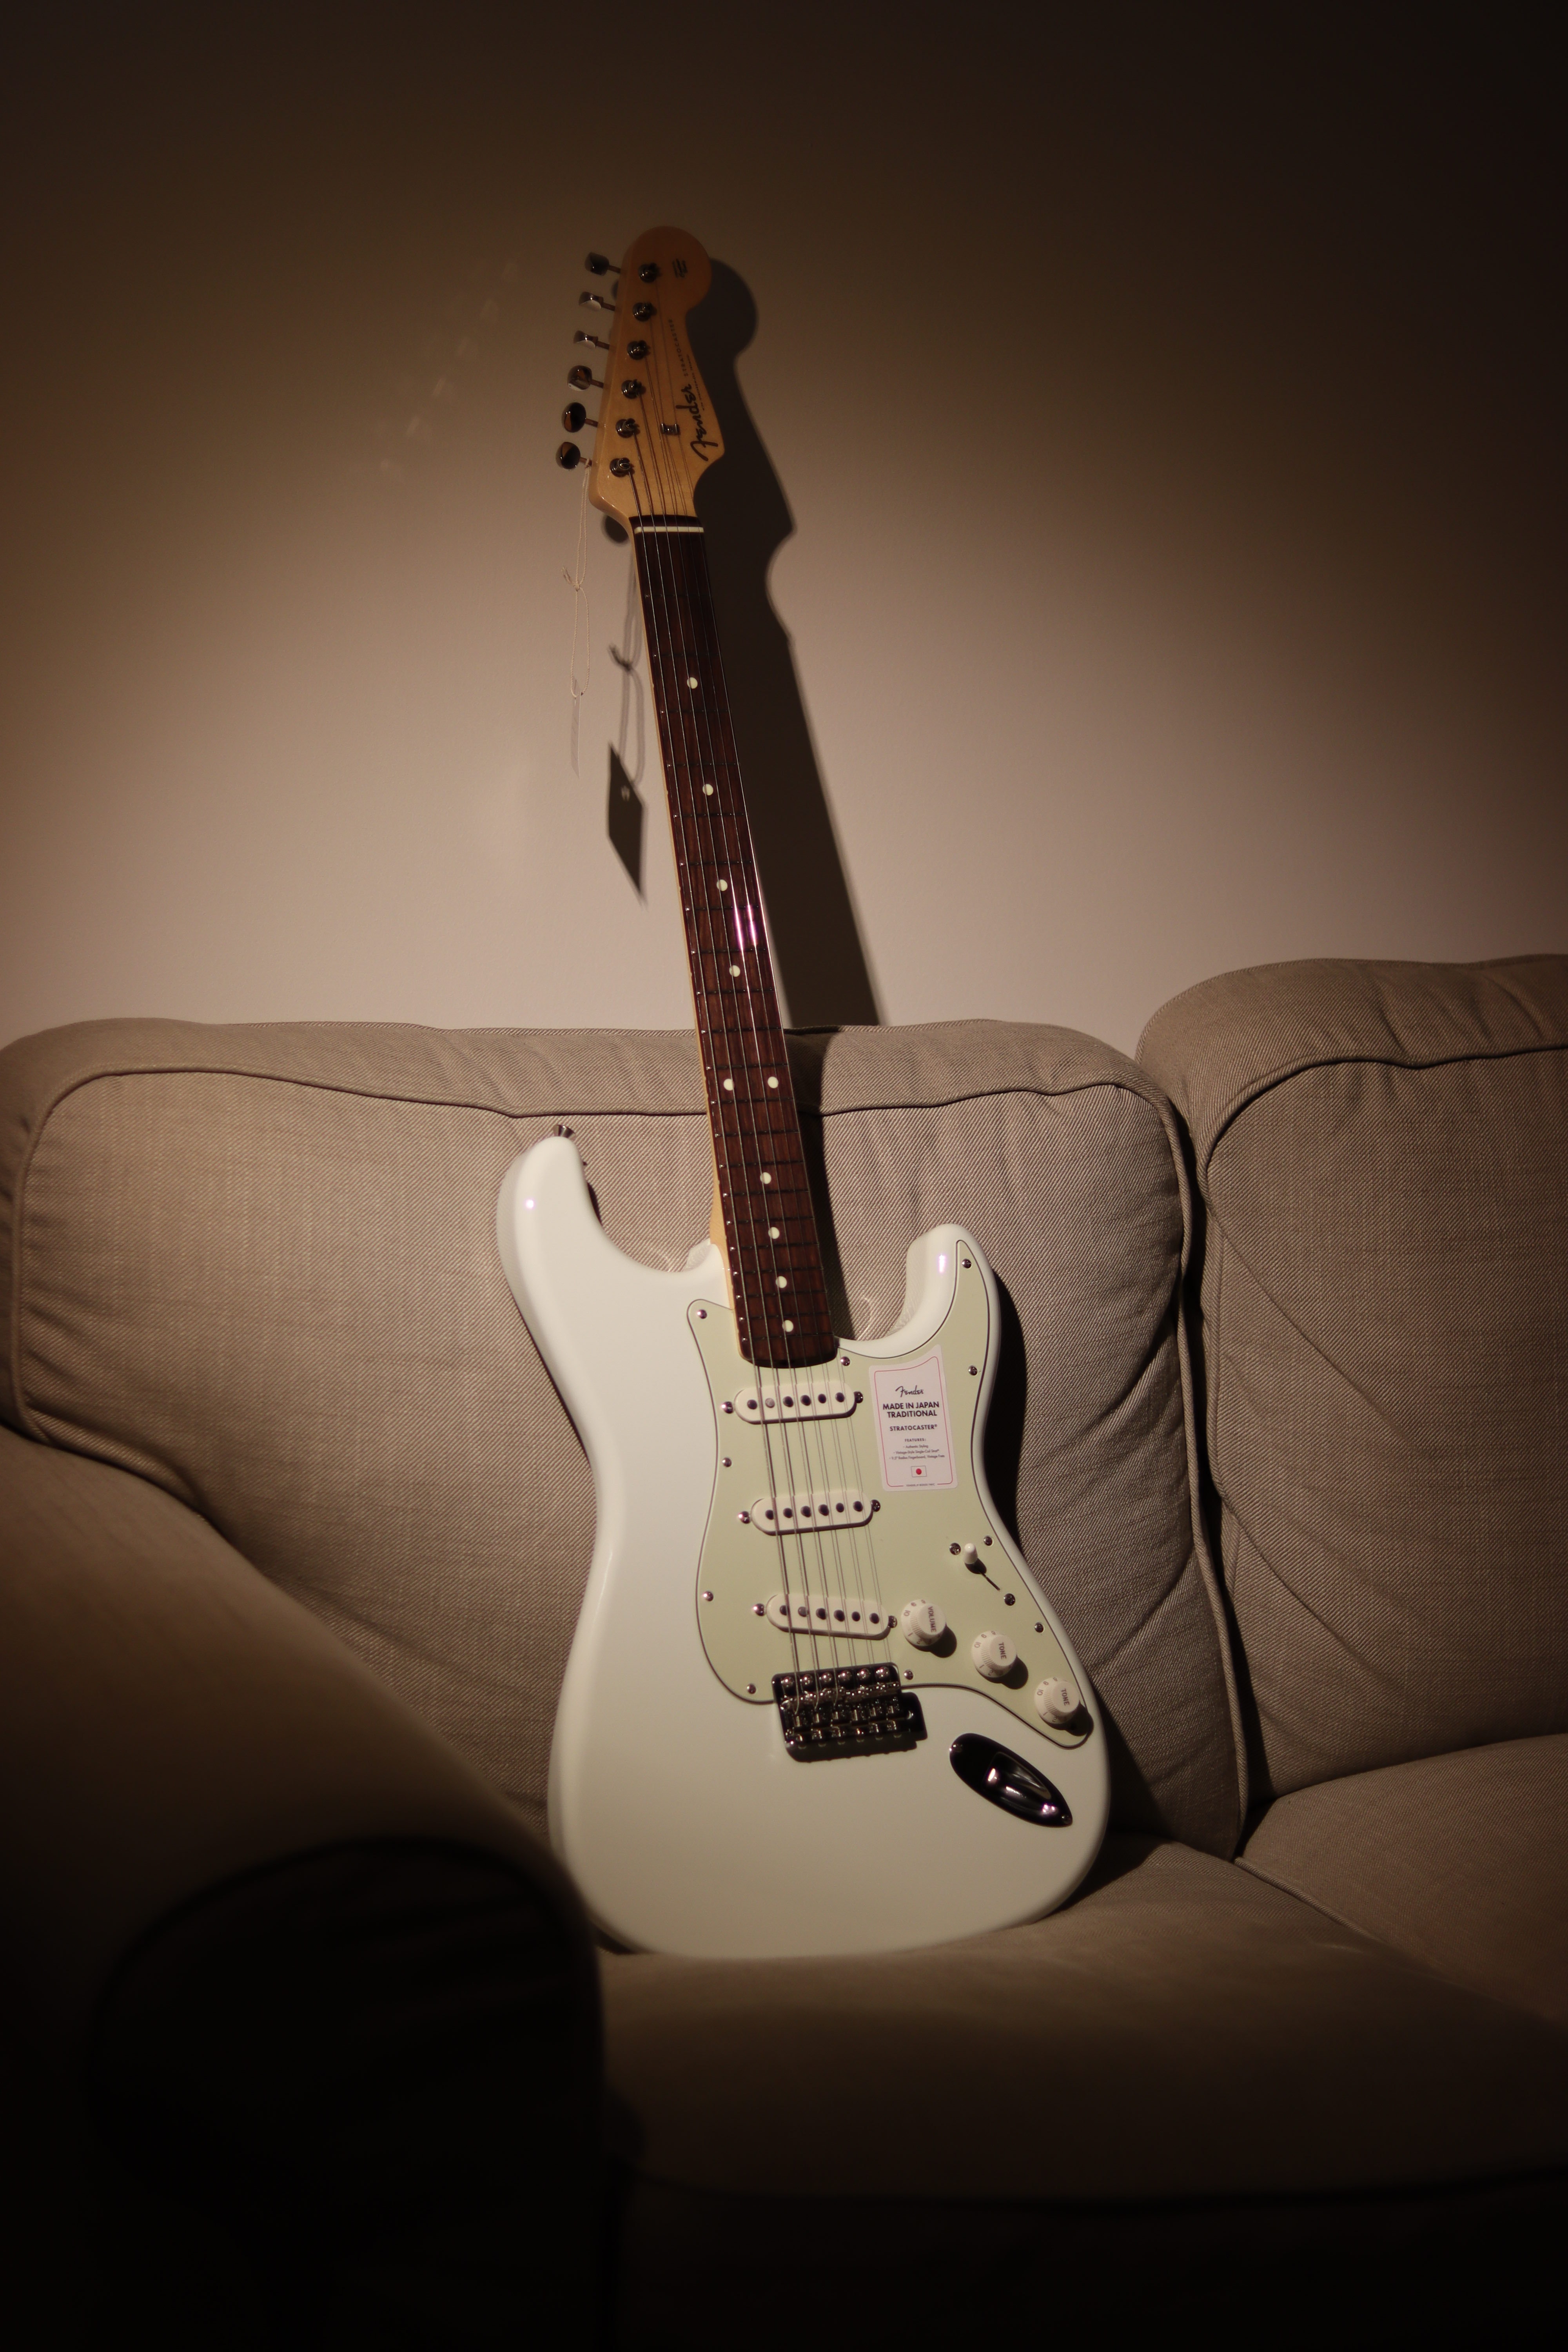 guitar, music, white, musical instrument, electric guitar, stratocaster